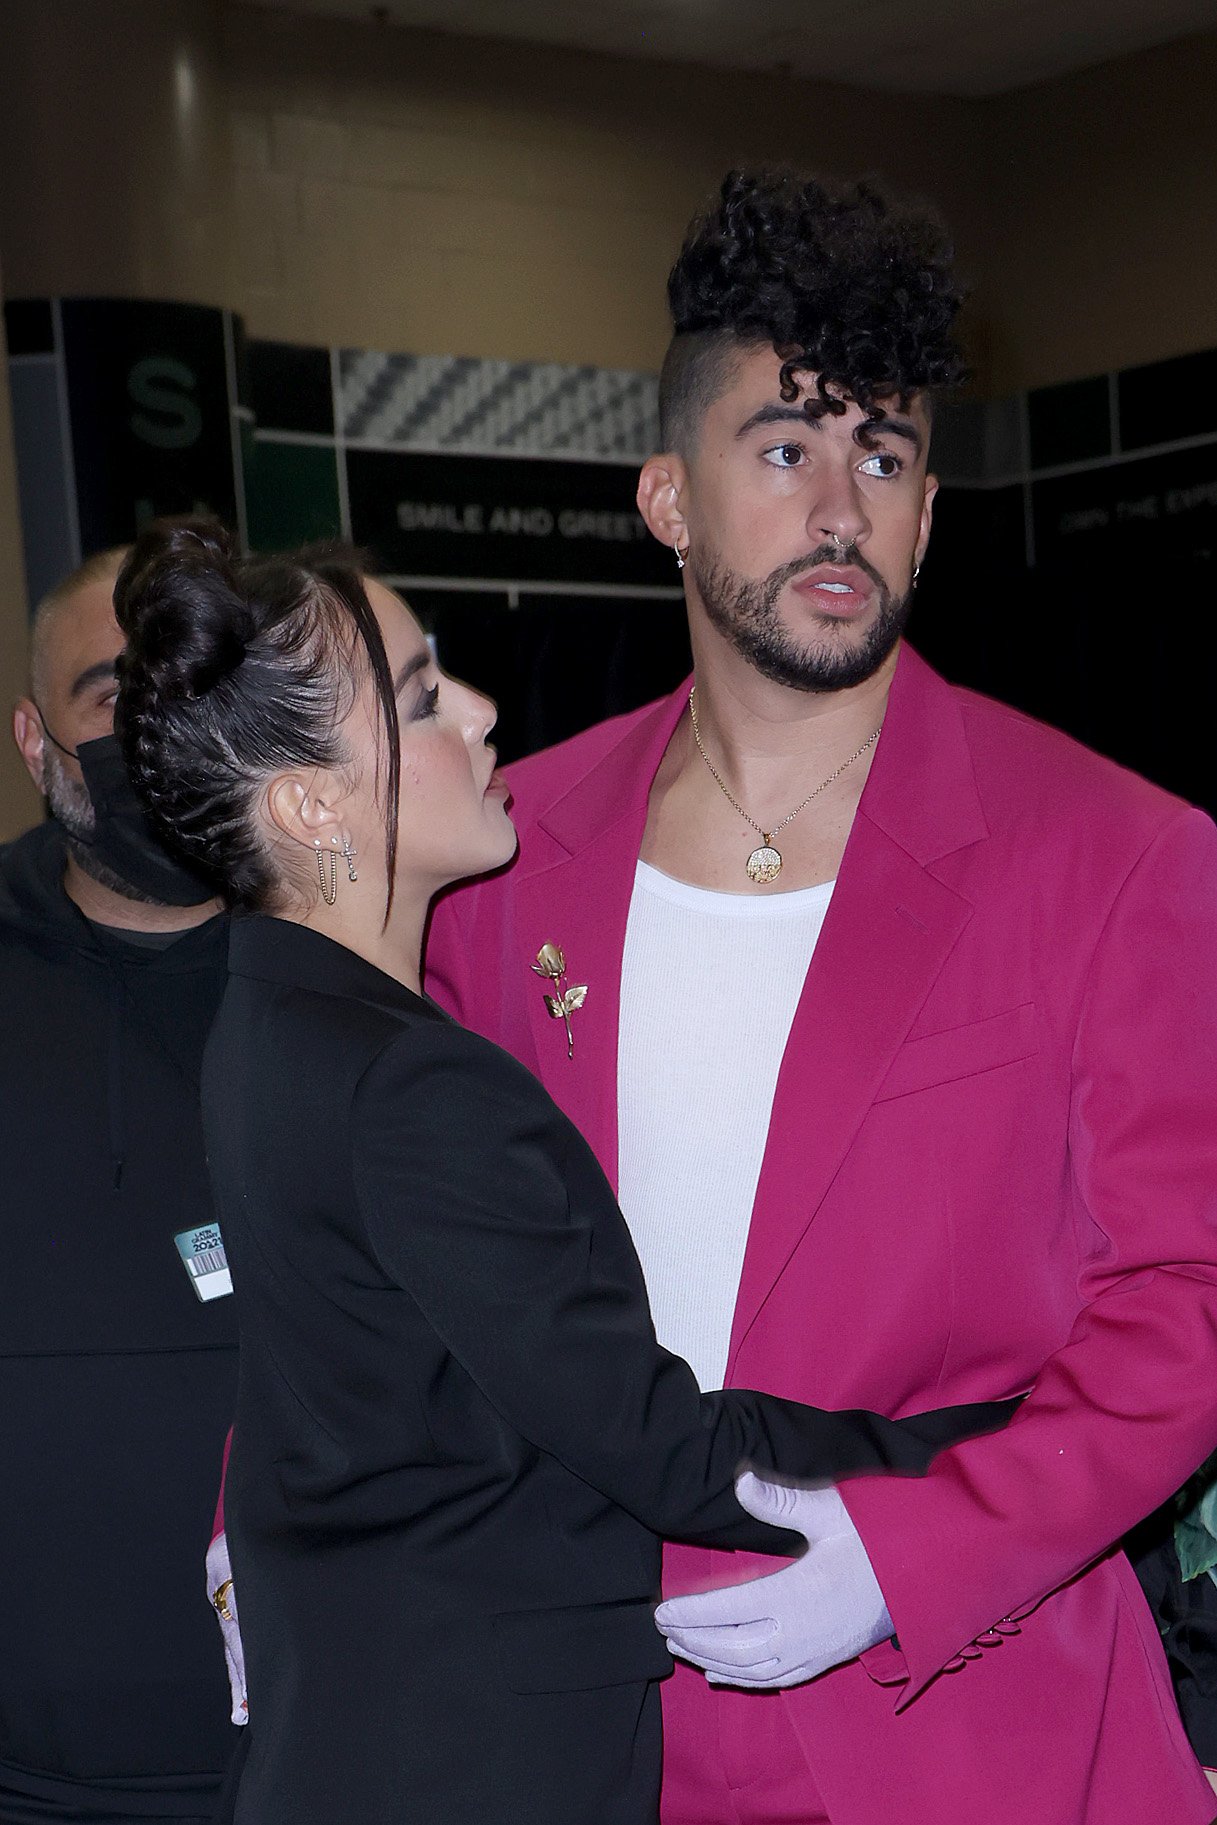 Gabriela Berlingeri and Bad Bunny during the 22nd Annual Latin GRAMMY Awards at MGM Grand Garden Arena on November 18, 2021, in Las Vegas, Nevada. | Source: Getty Images